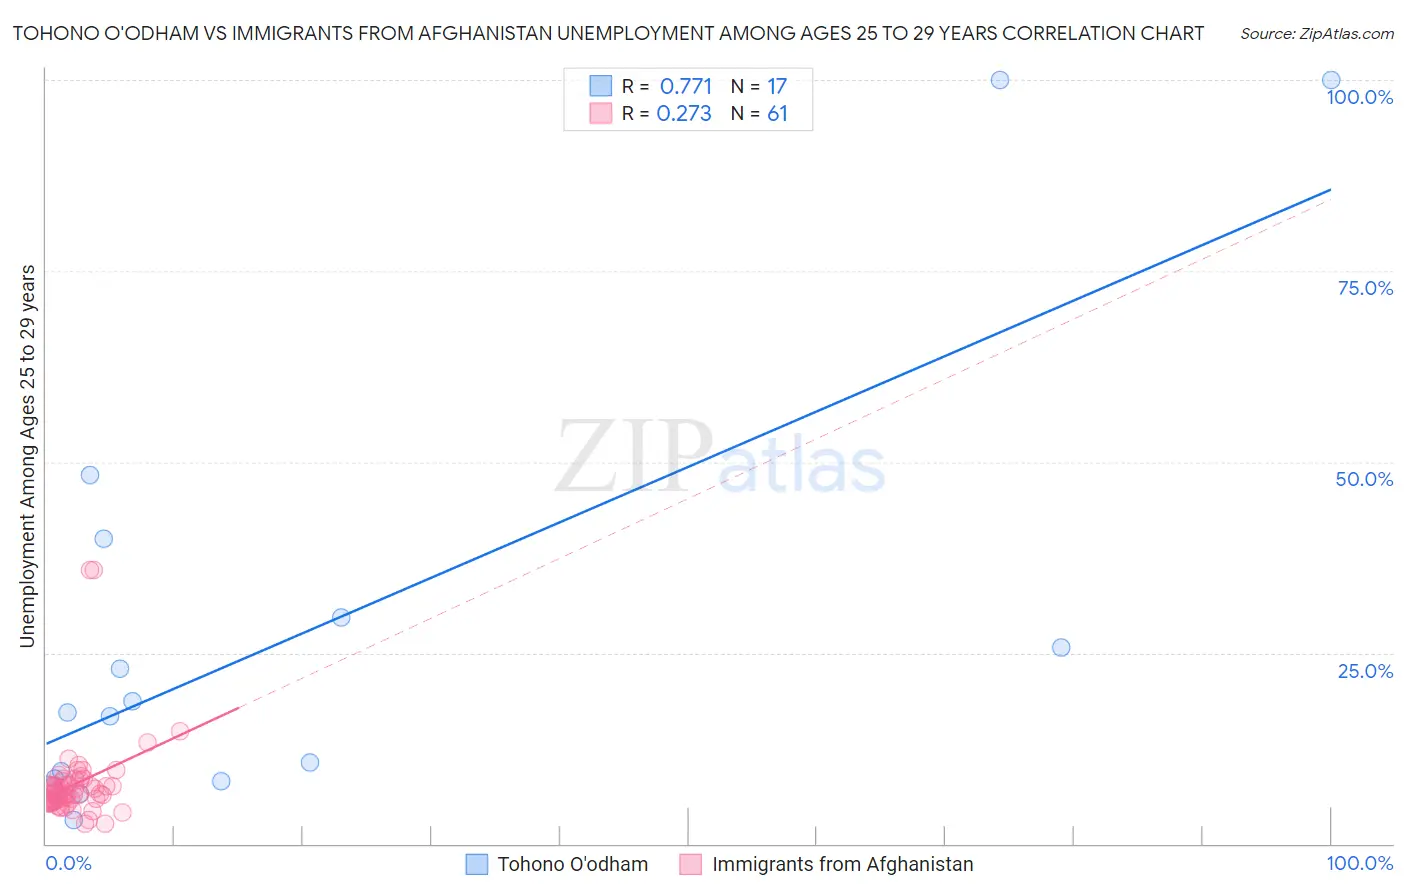 Tohono O'odham vs Immigrants from Afghanistan Unemployment Among Ages 25 to 29 years